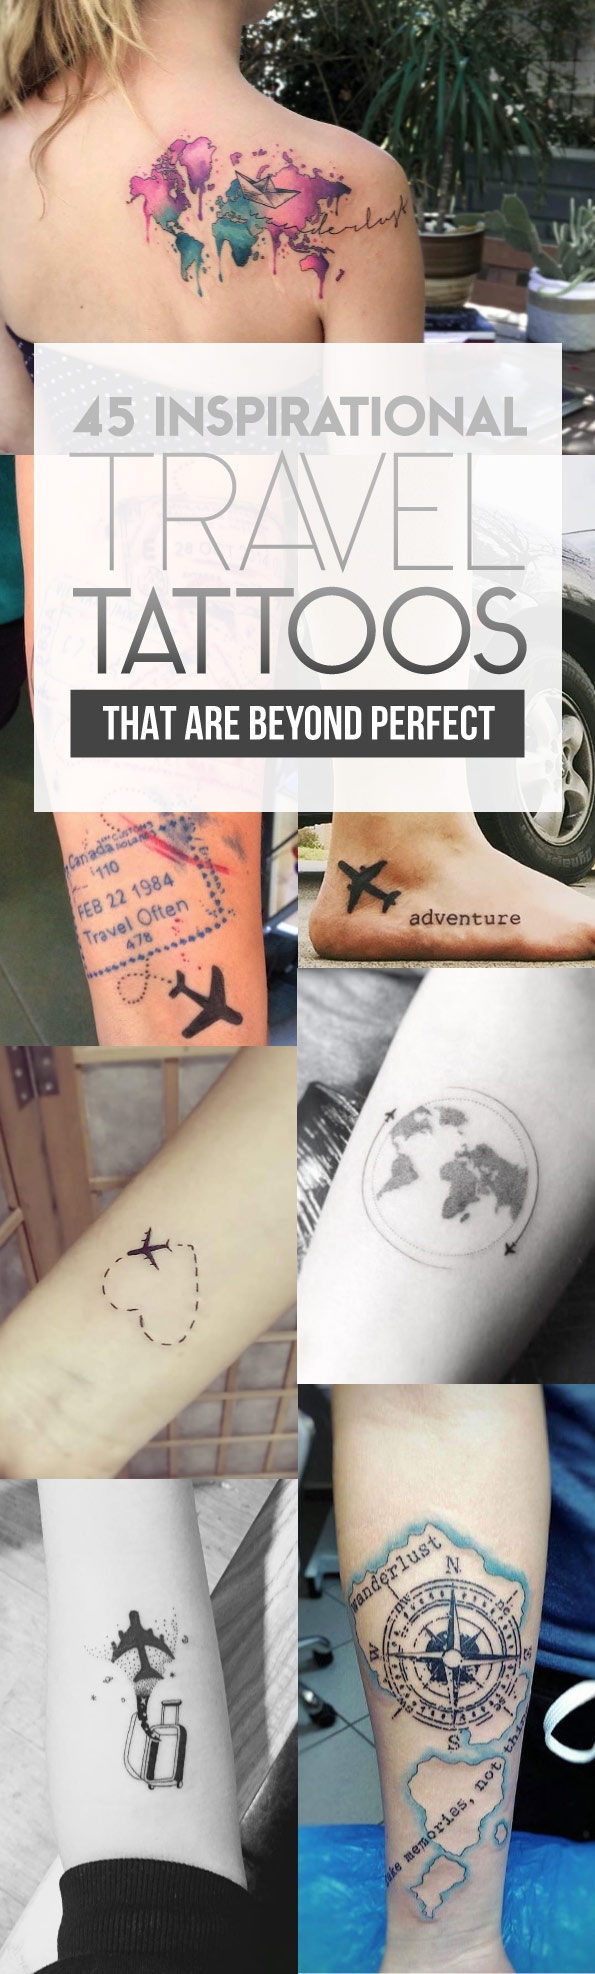 45 Inspirational Travel Tattoos That Are Beyond Perfect | TattooBlend